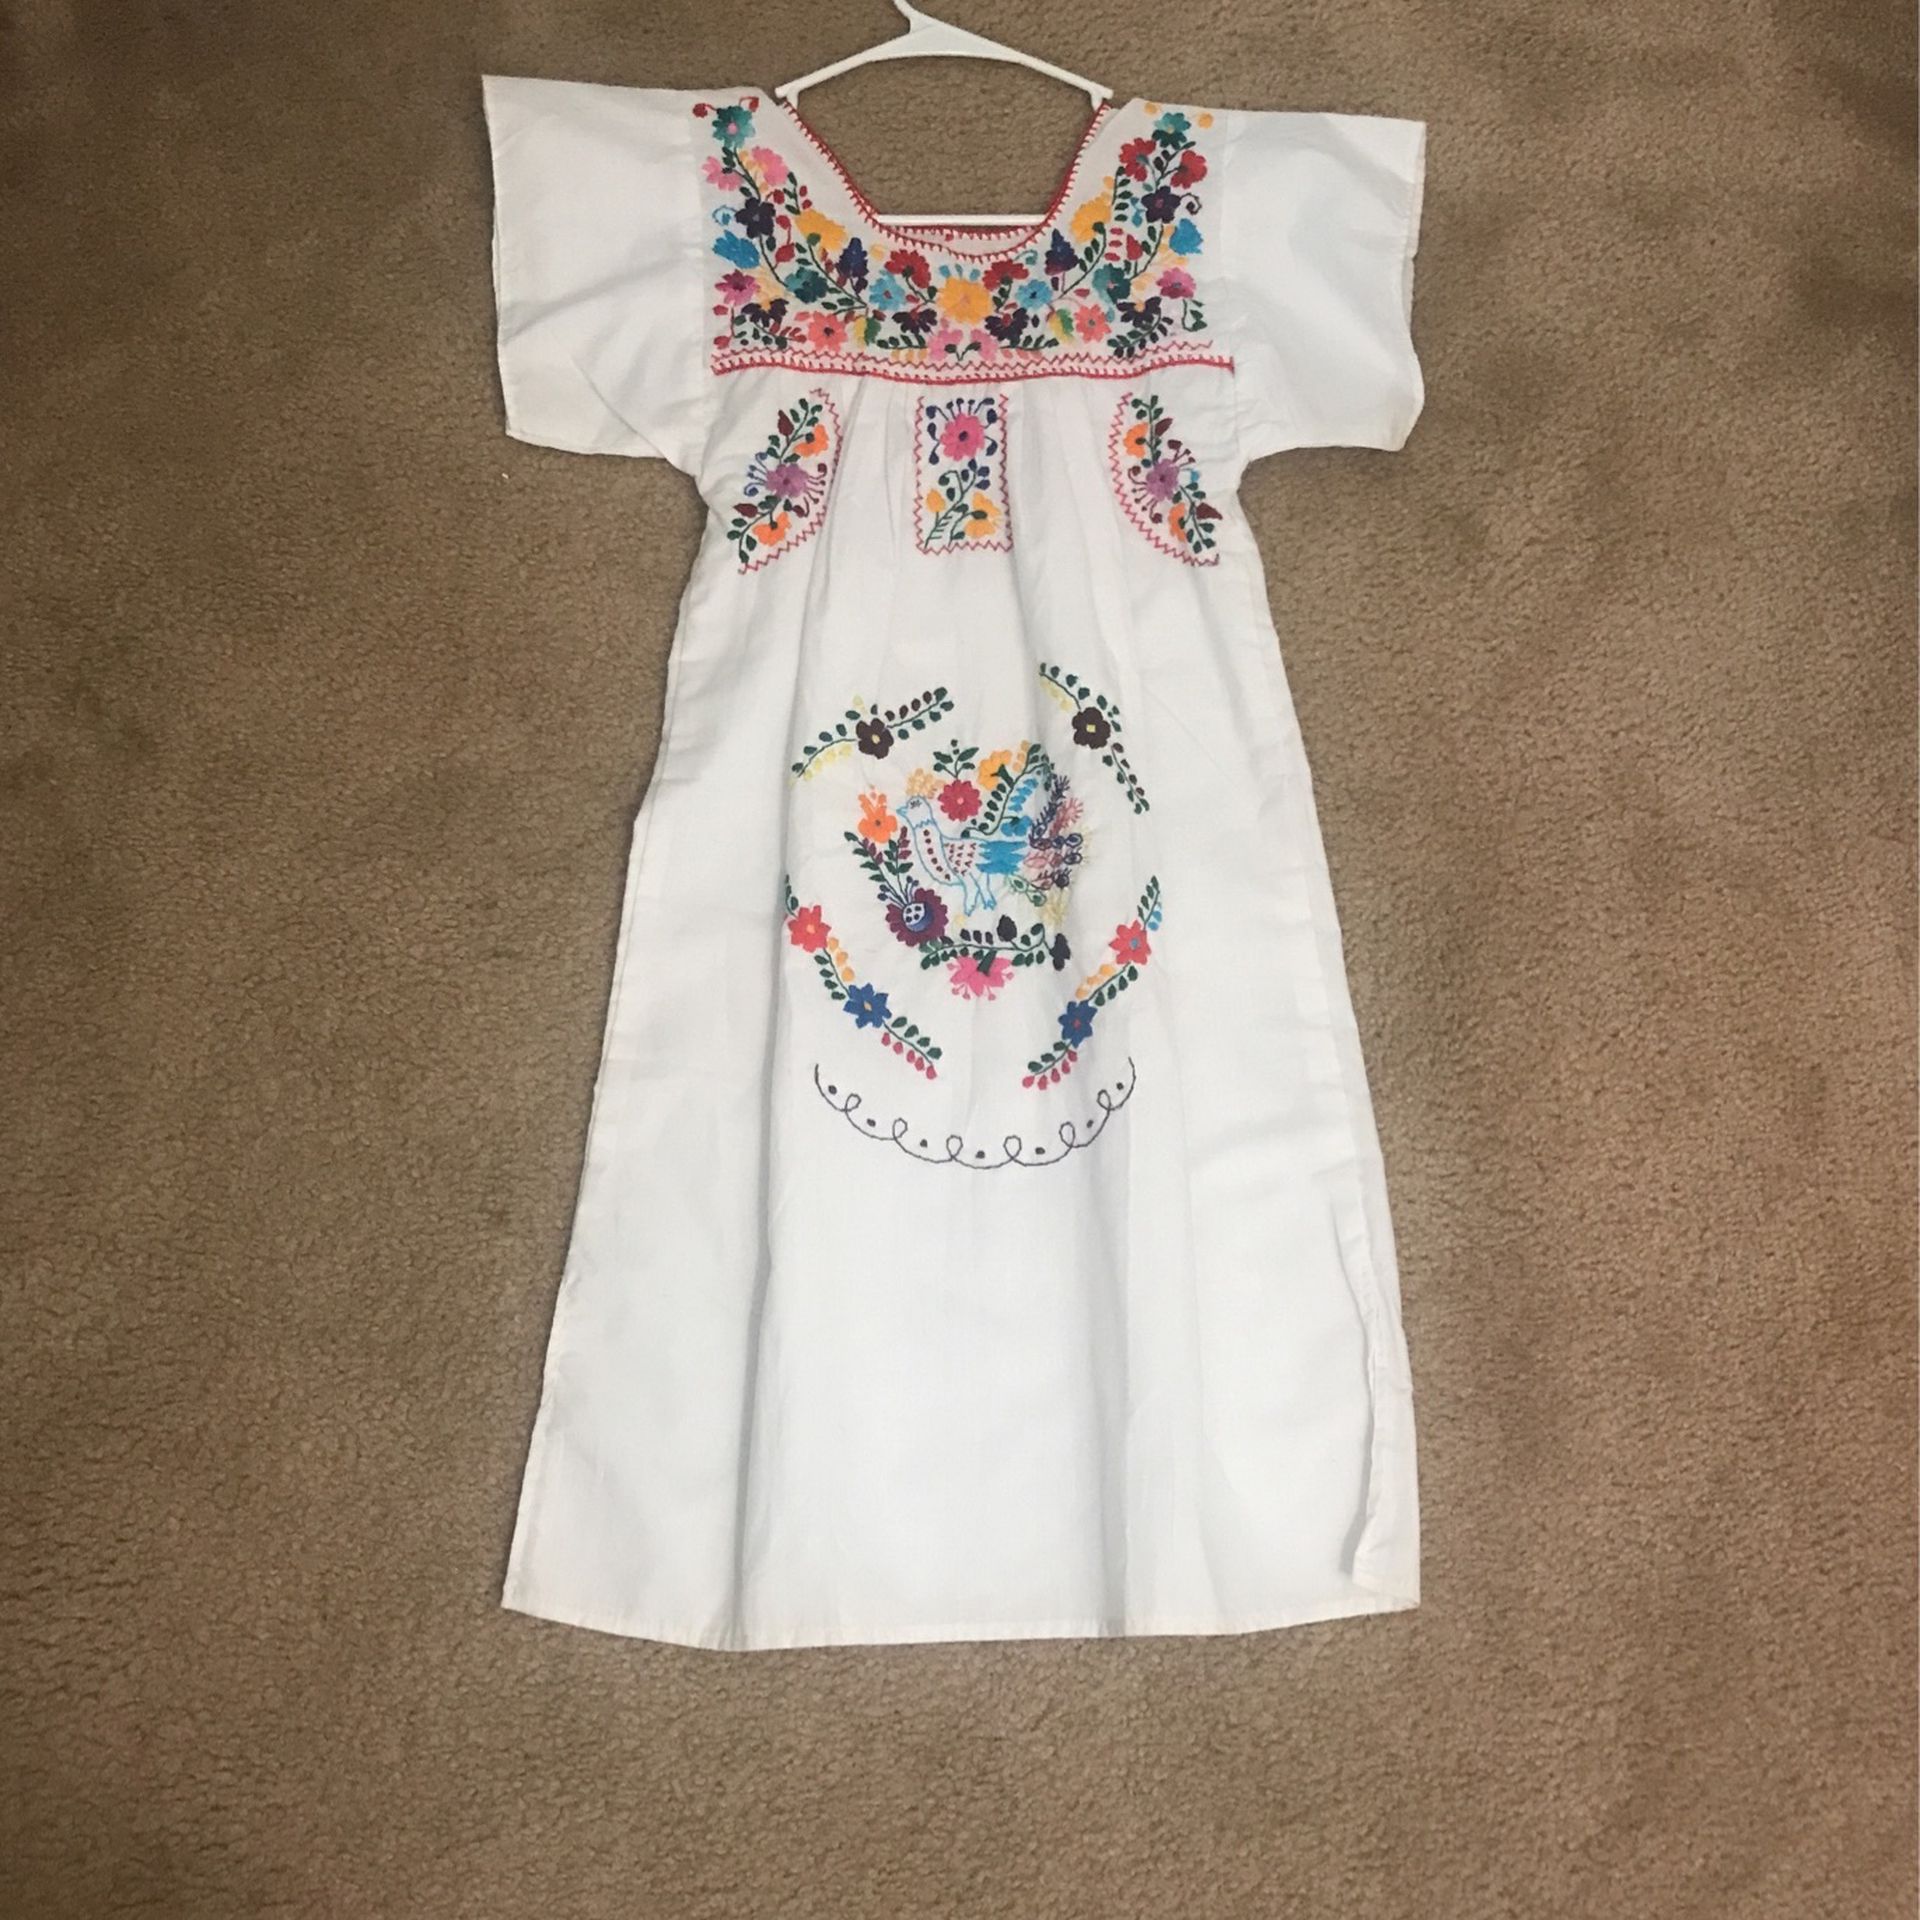 Girls Size 10 Mexican Style Embroidered Dress